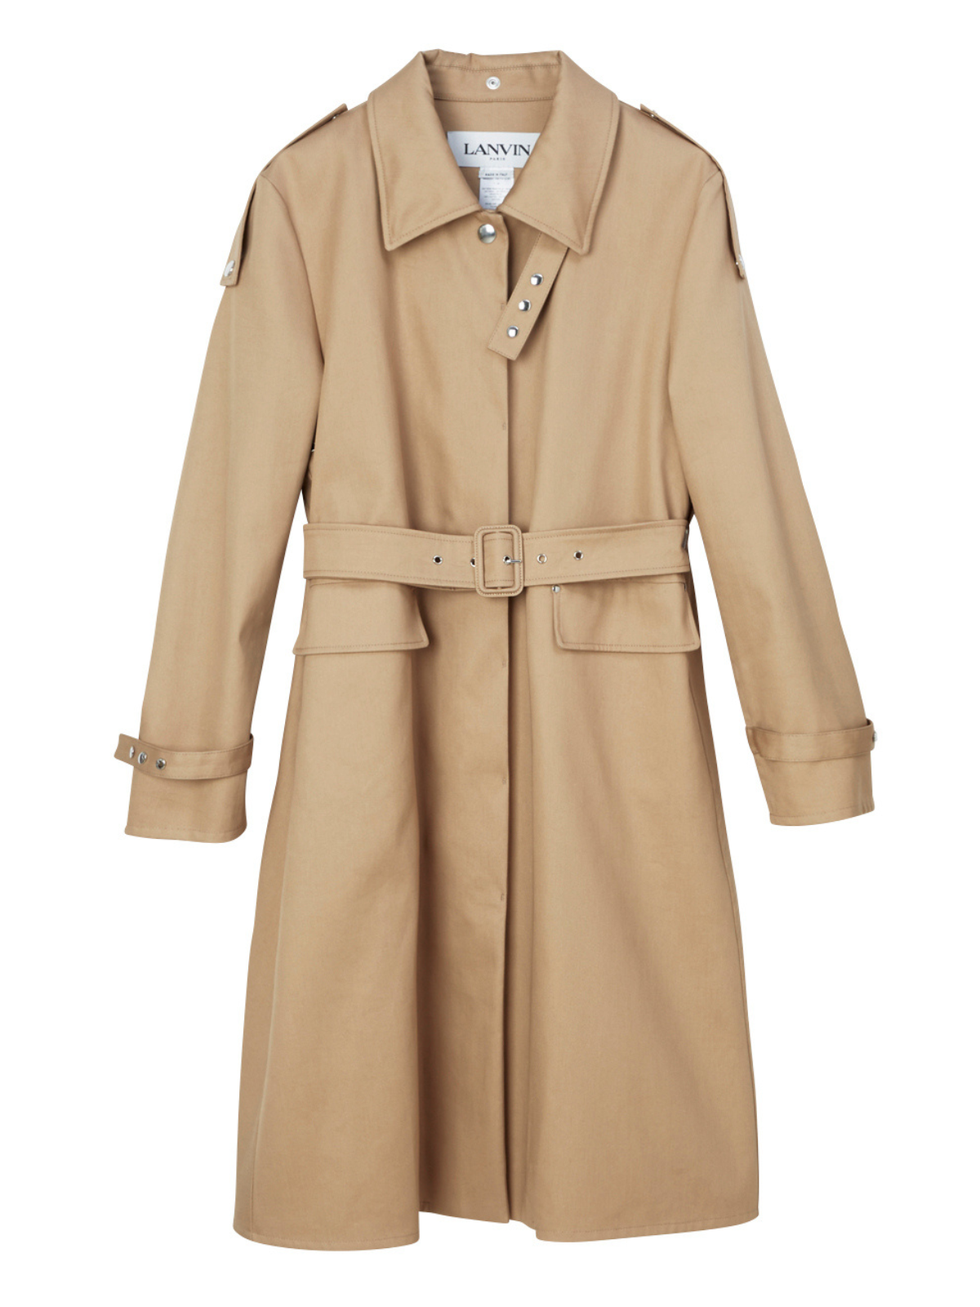 a brown trench coat